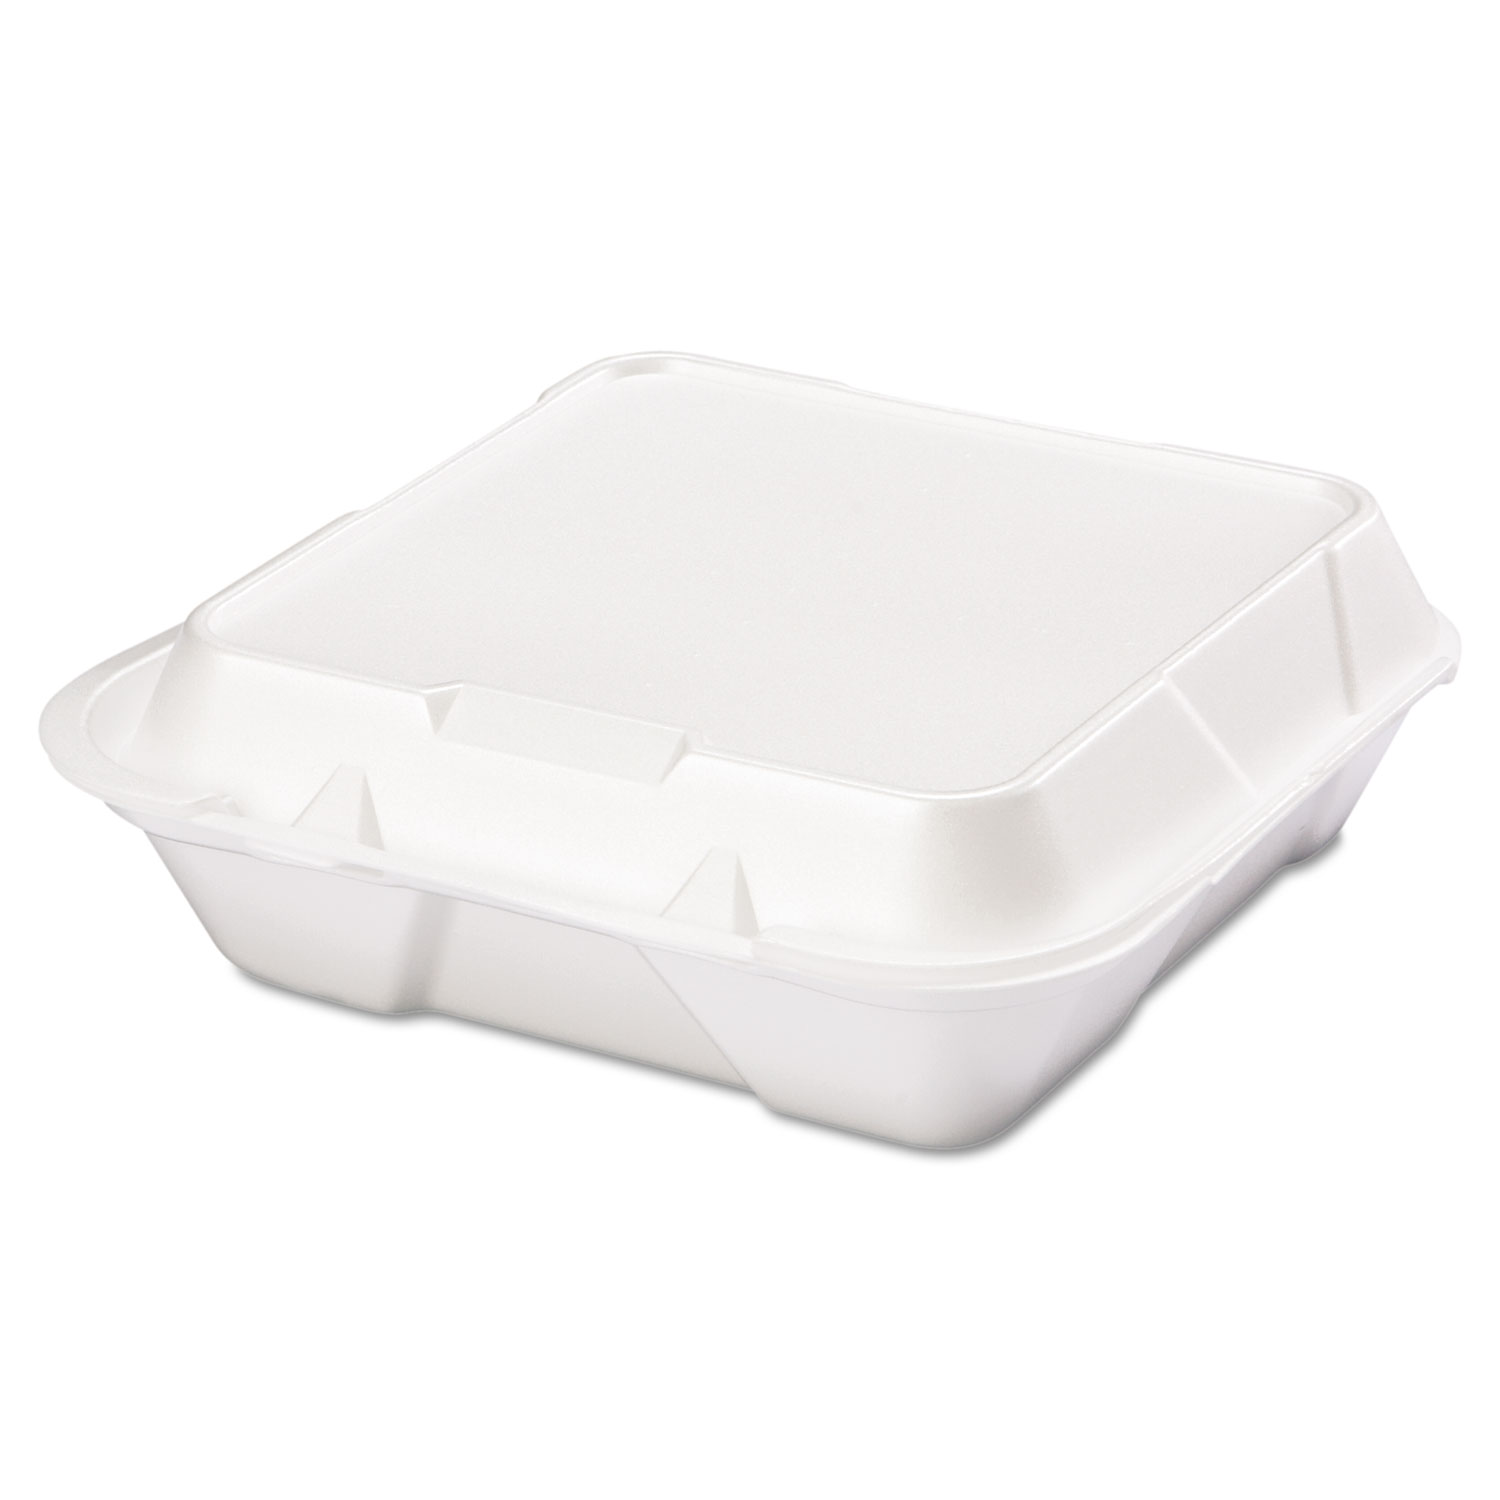 100//Bag White 1-Compartment GNPSN200 Genpak Foam Hinged Carryout Container